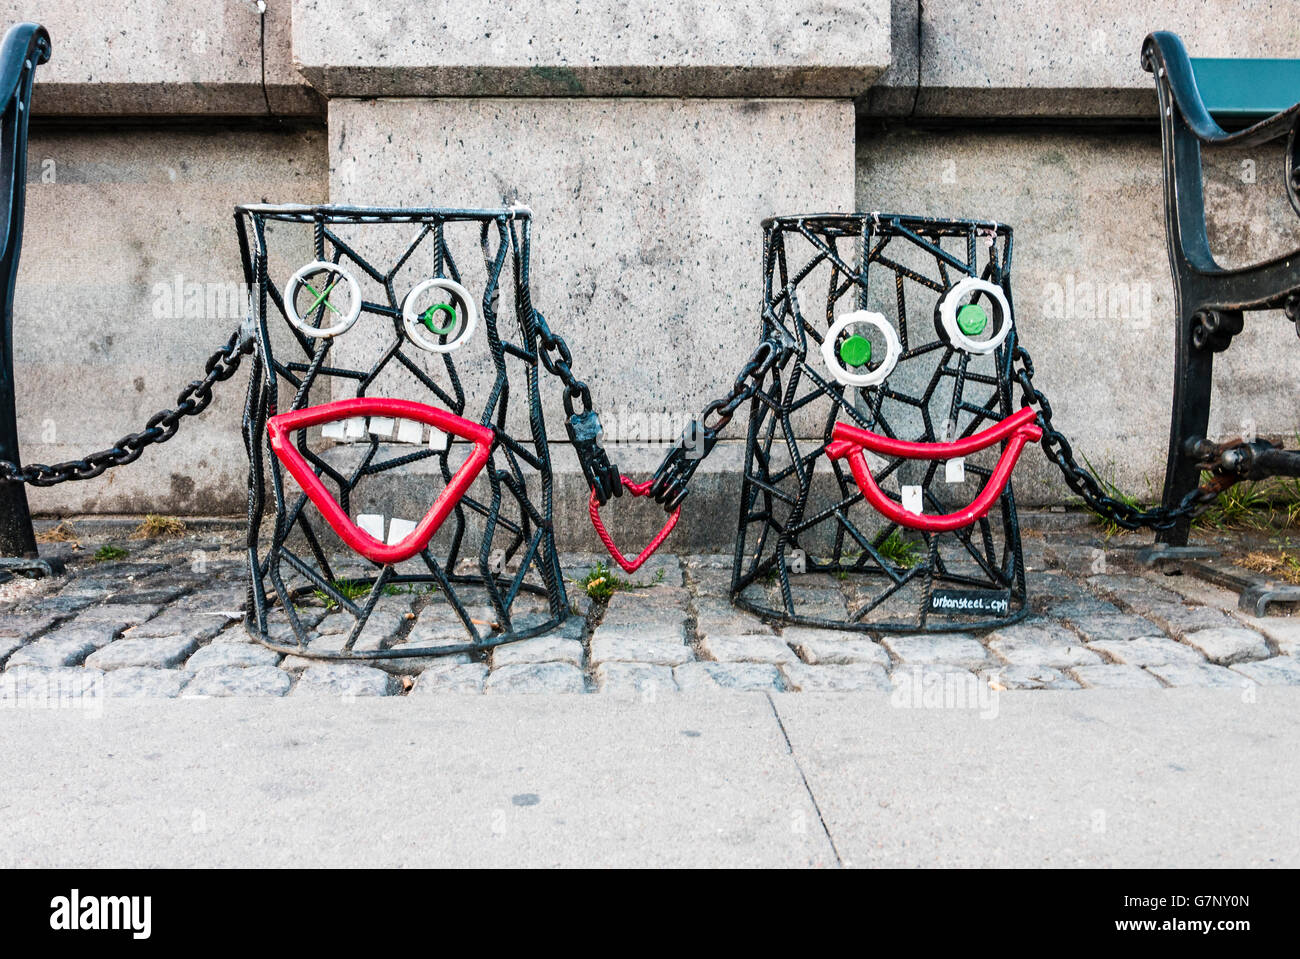 Metal street-art in shape of two bins with faces, holding a heart between them, on the Dronning Louises Bro bridge, Copenhagen Stock Photo